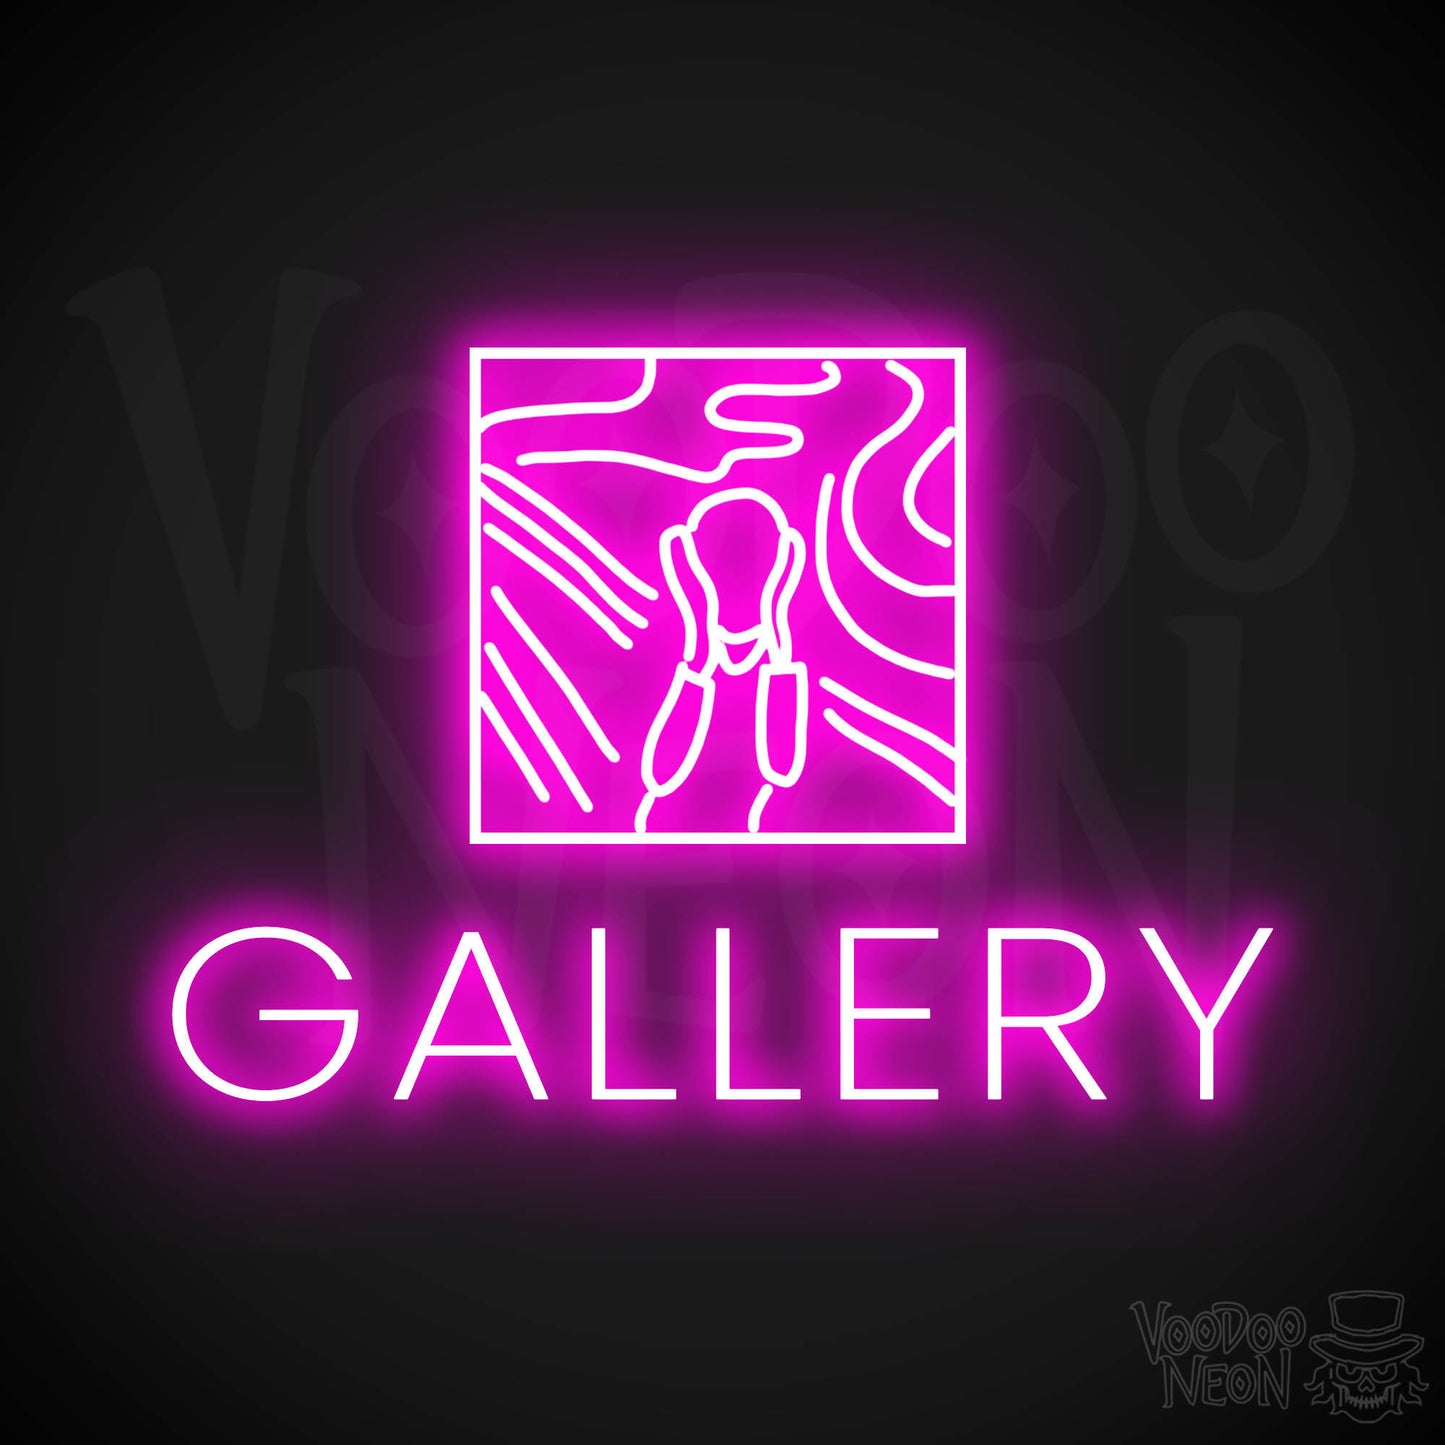 Gallery LED Neon - Pink